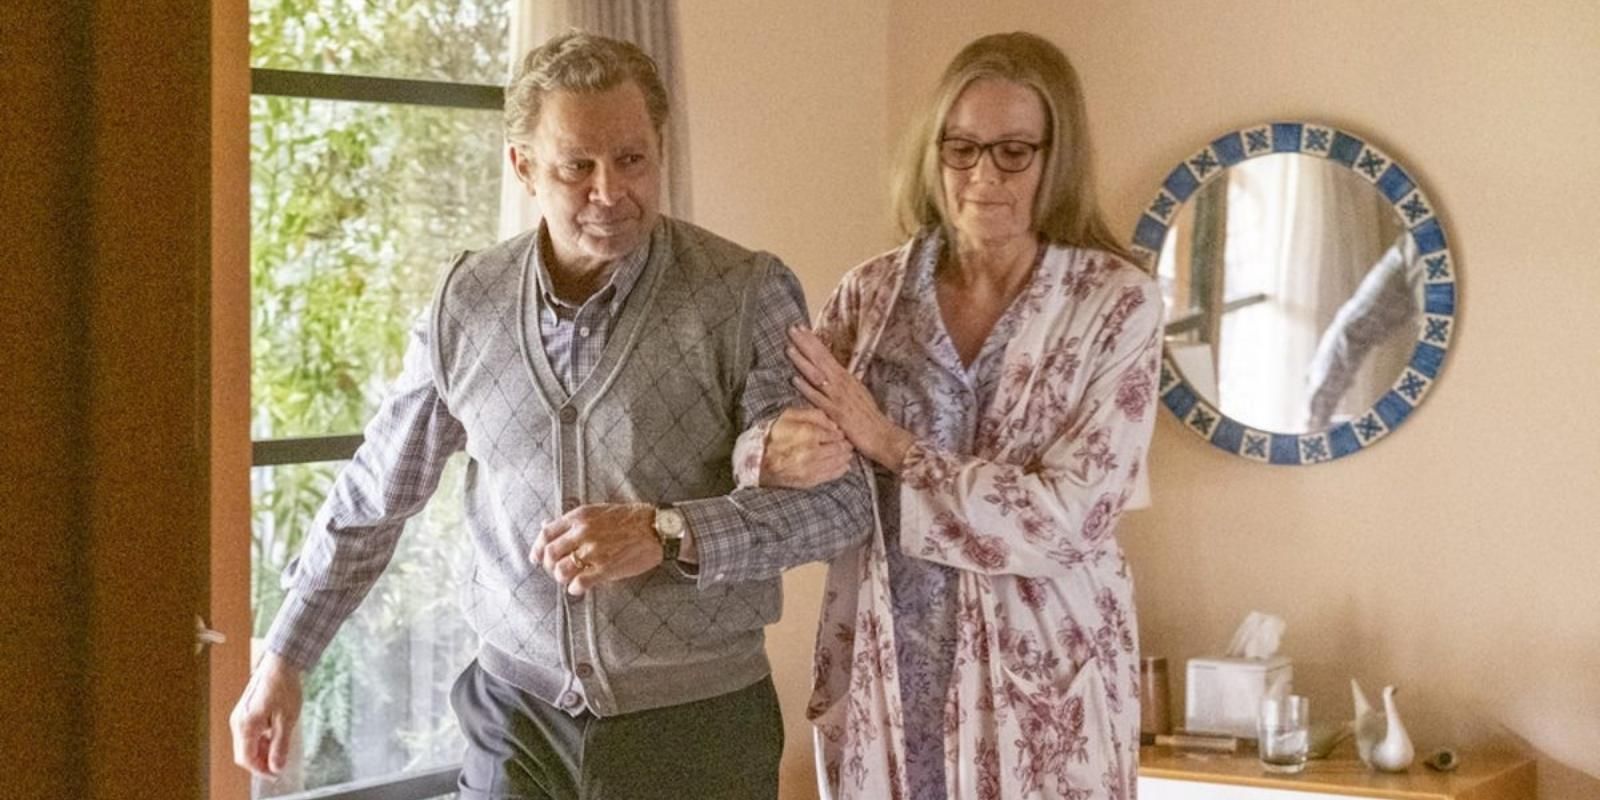 Elderly Miguel Rivas helps elderly Rebecca Pearson Rivas out of bed in This Is Us